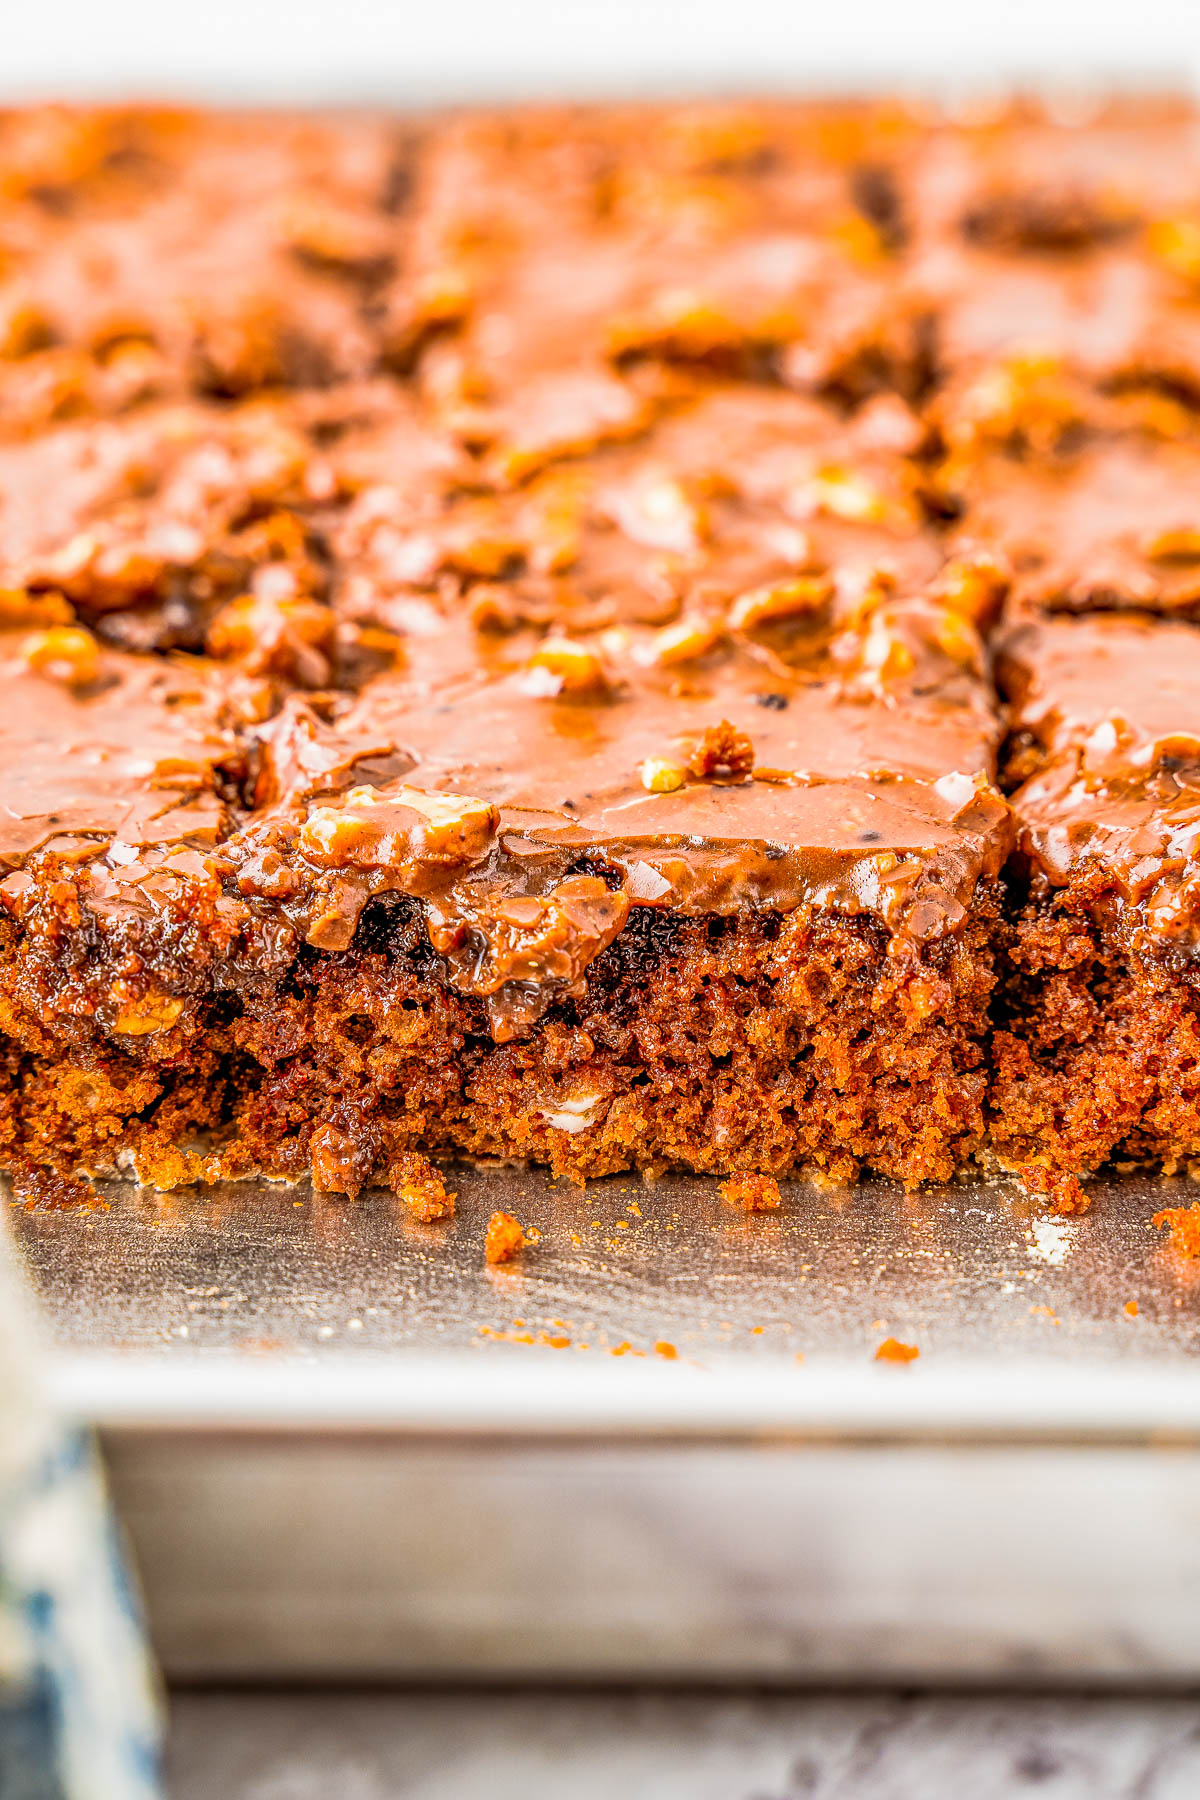 Texas Sheet Cake –  An EASY no-mixer recipe for classic Texas sheet cake that's so rich in chocolate flavor thanks to the moist chocolate cake itself and to the chocolate frosting with walnuts for a bit of crunch in every bite! Ready in less than 1 hour, and it feeds a crowd, making this a perfect party or celebration cake any time of year!